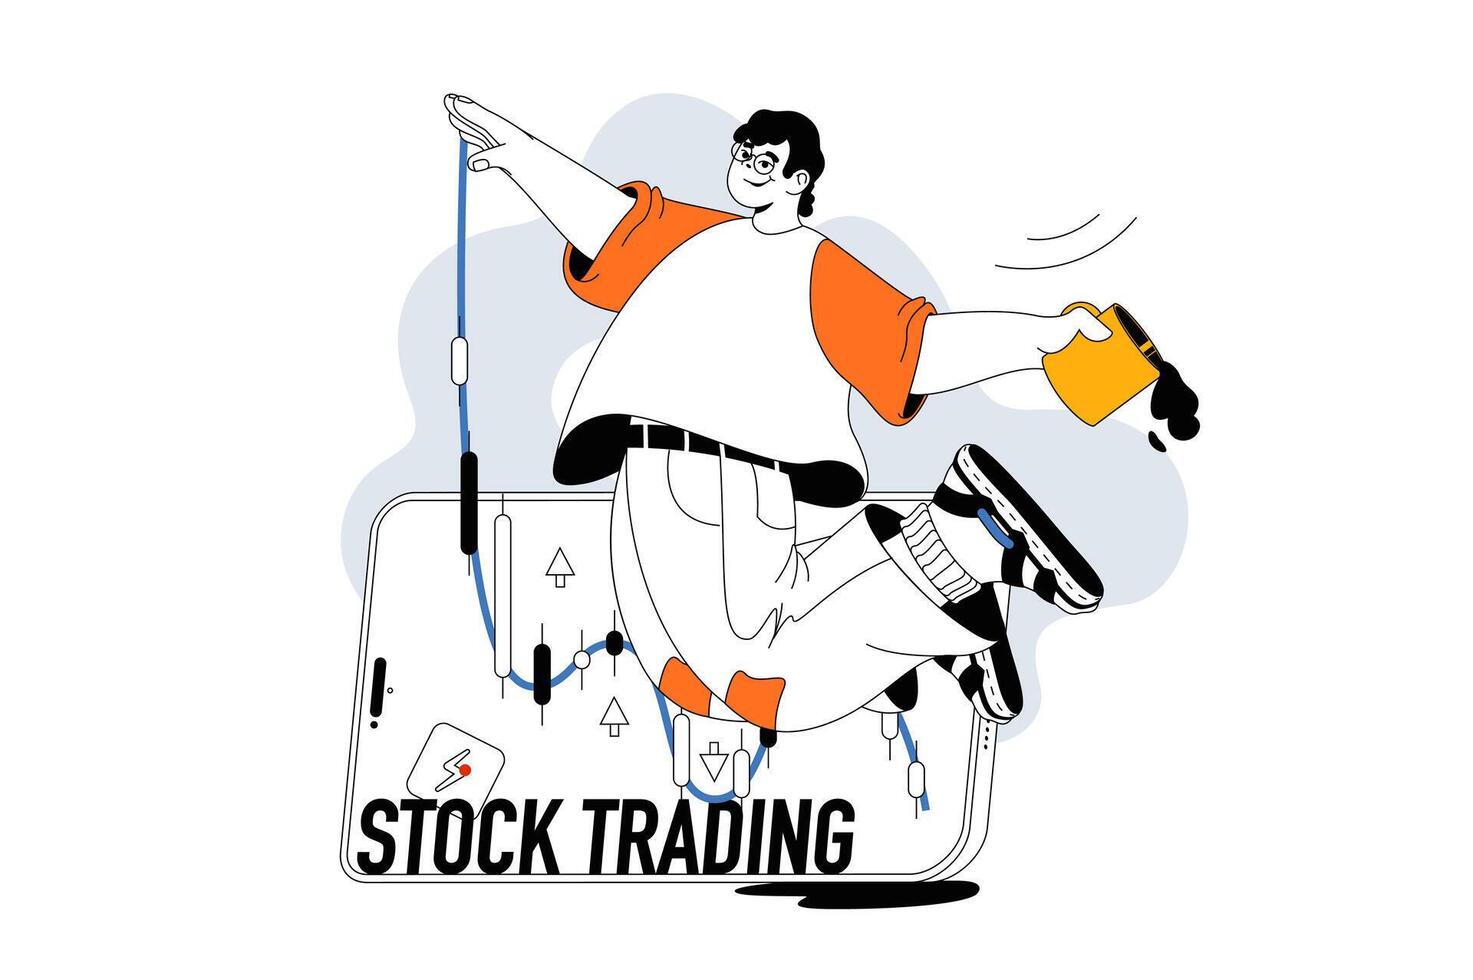 Stock trading concept with people scene in flat line design for web. Man trading on exchange market, investing money, earning profit. Vector illustration for social media banner, marketing material.